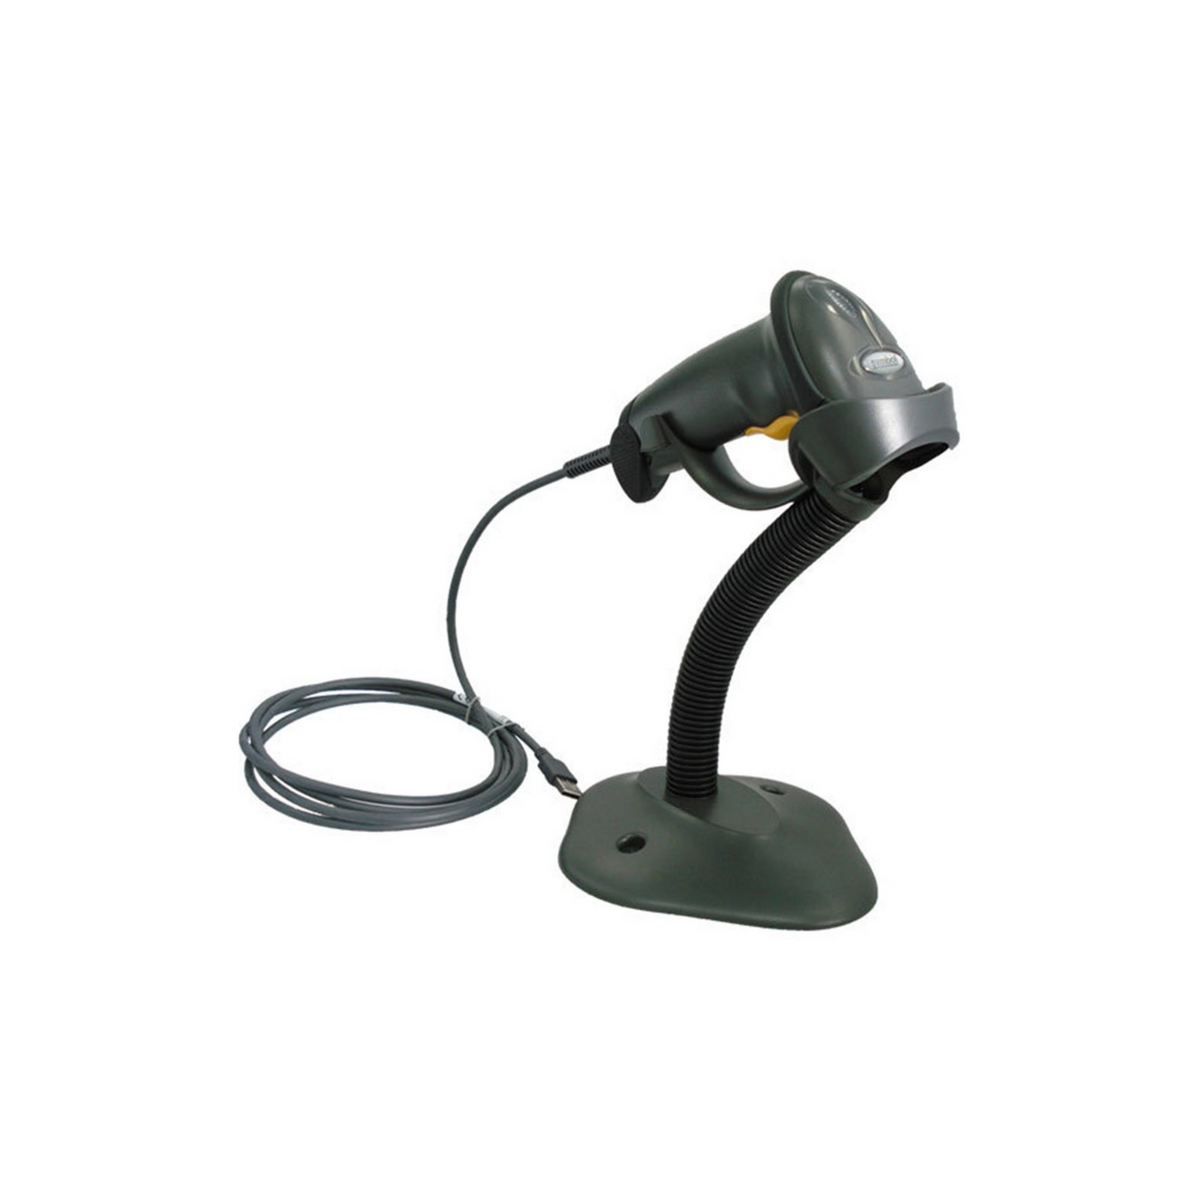 Zebra EVM, LS2208, USB (PC) Kit, Includes cable and stand, North America only, (Black)